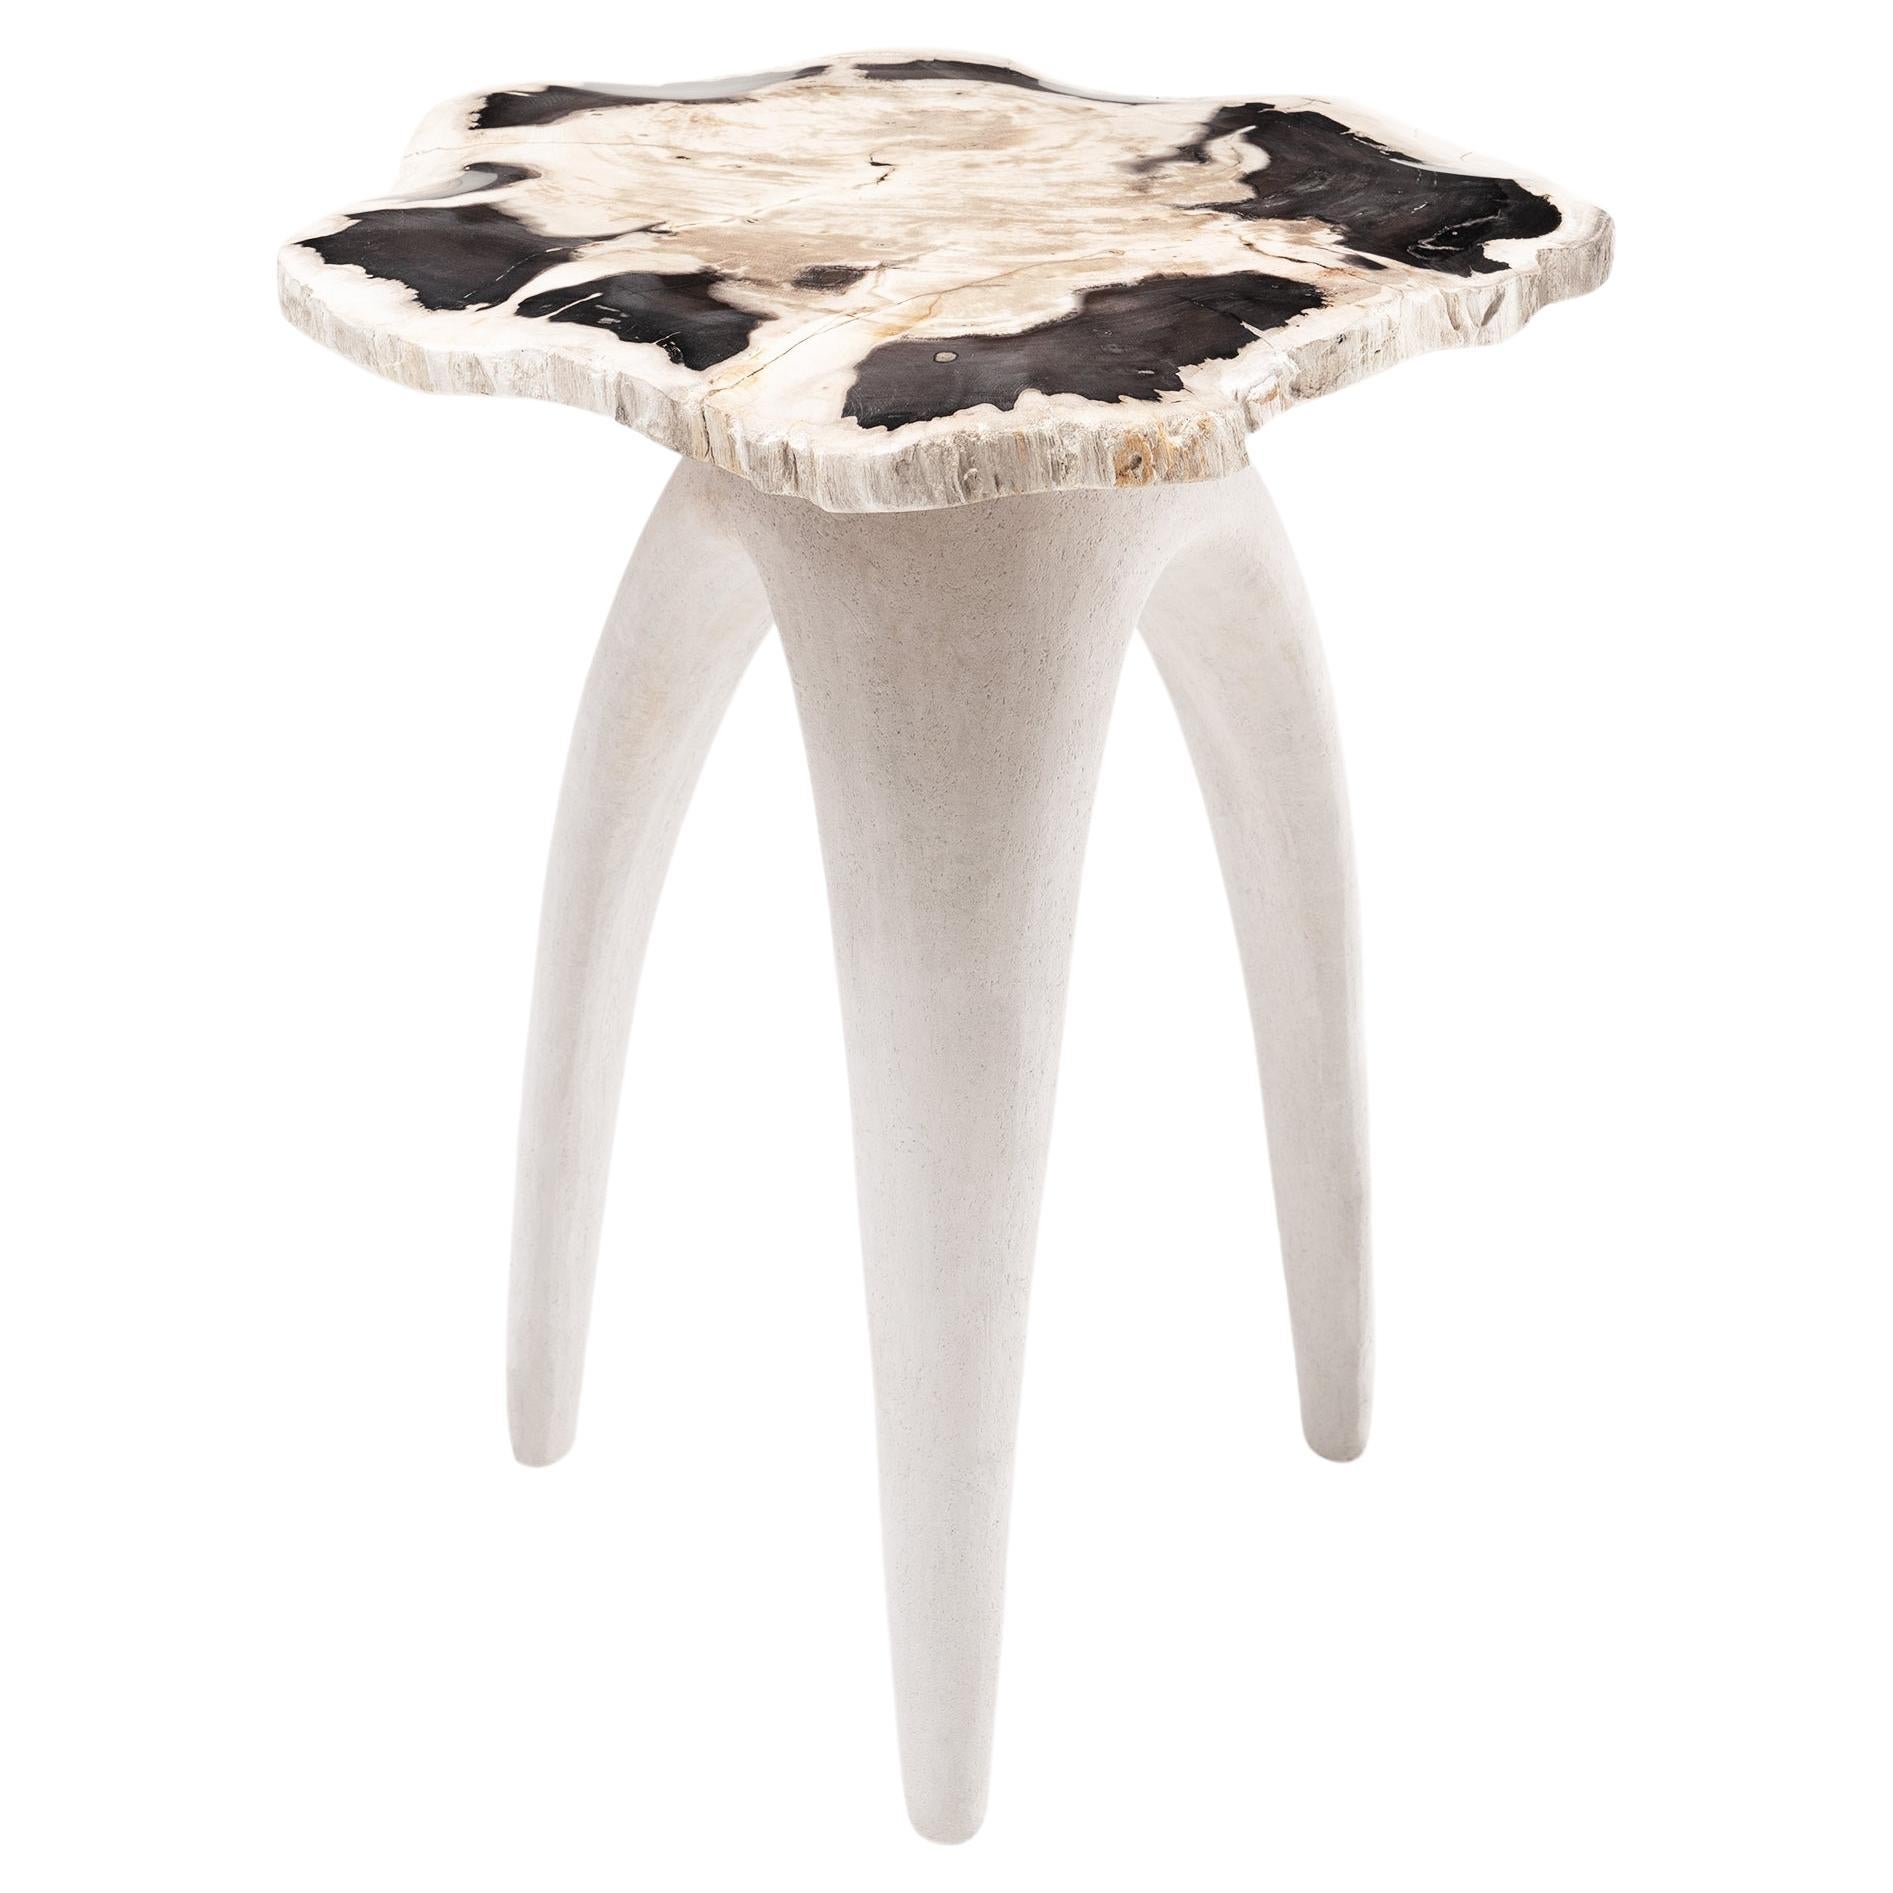 Bermuda Love Triangle • Hand-Carved Solid Petrified Wood Side Table by Odditi